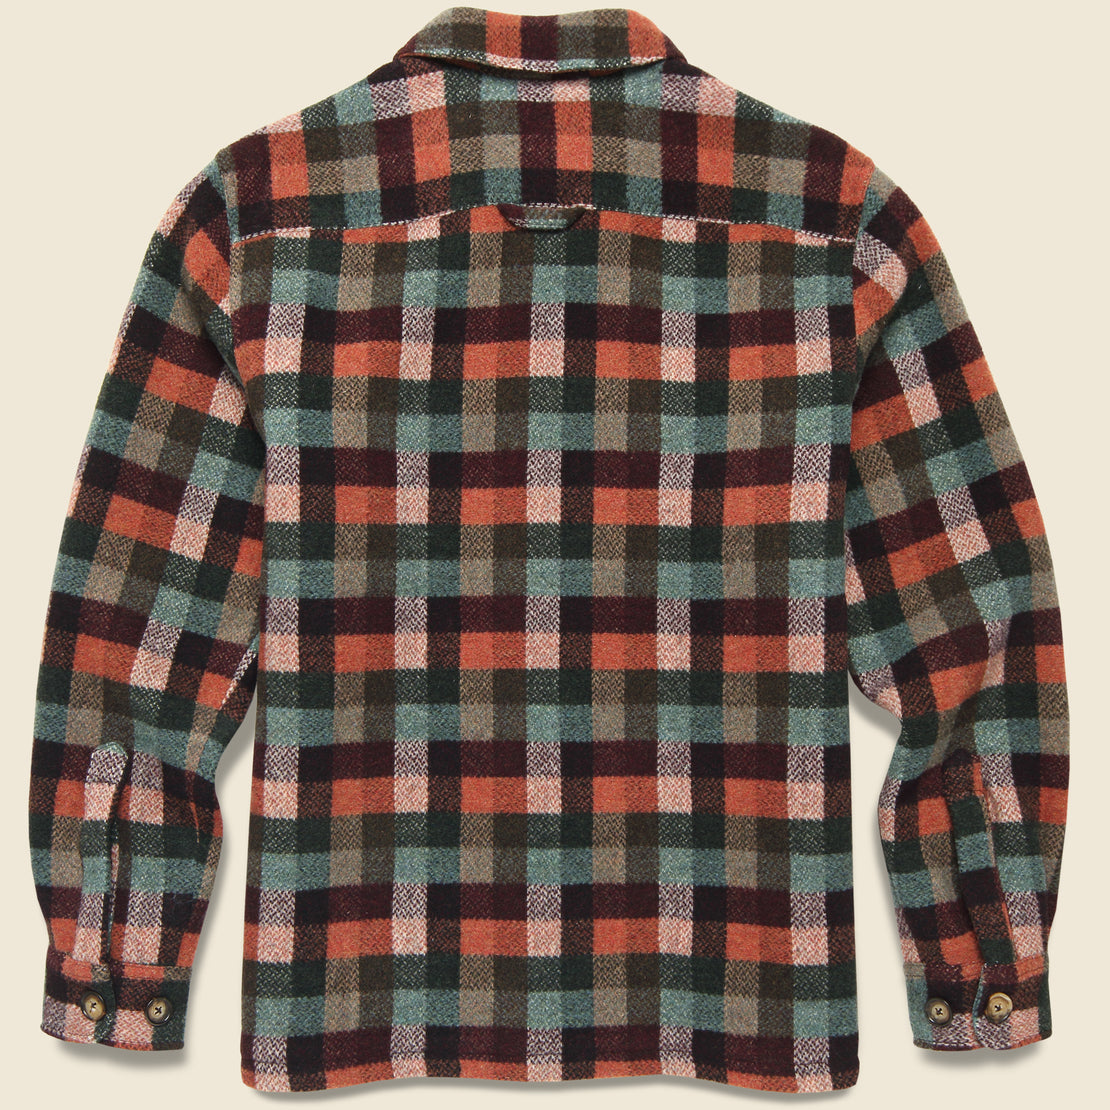 Block Overshirt - Brick/Green/Multi - Portuguese Flannel - STAG Provisions - Tops - L/S Woven - Overshirt